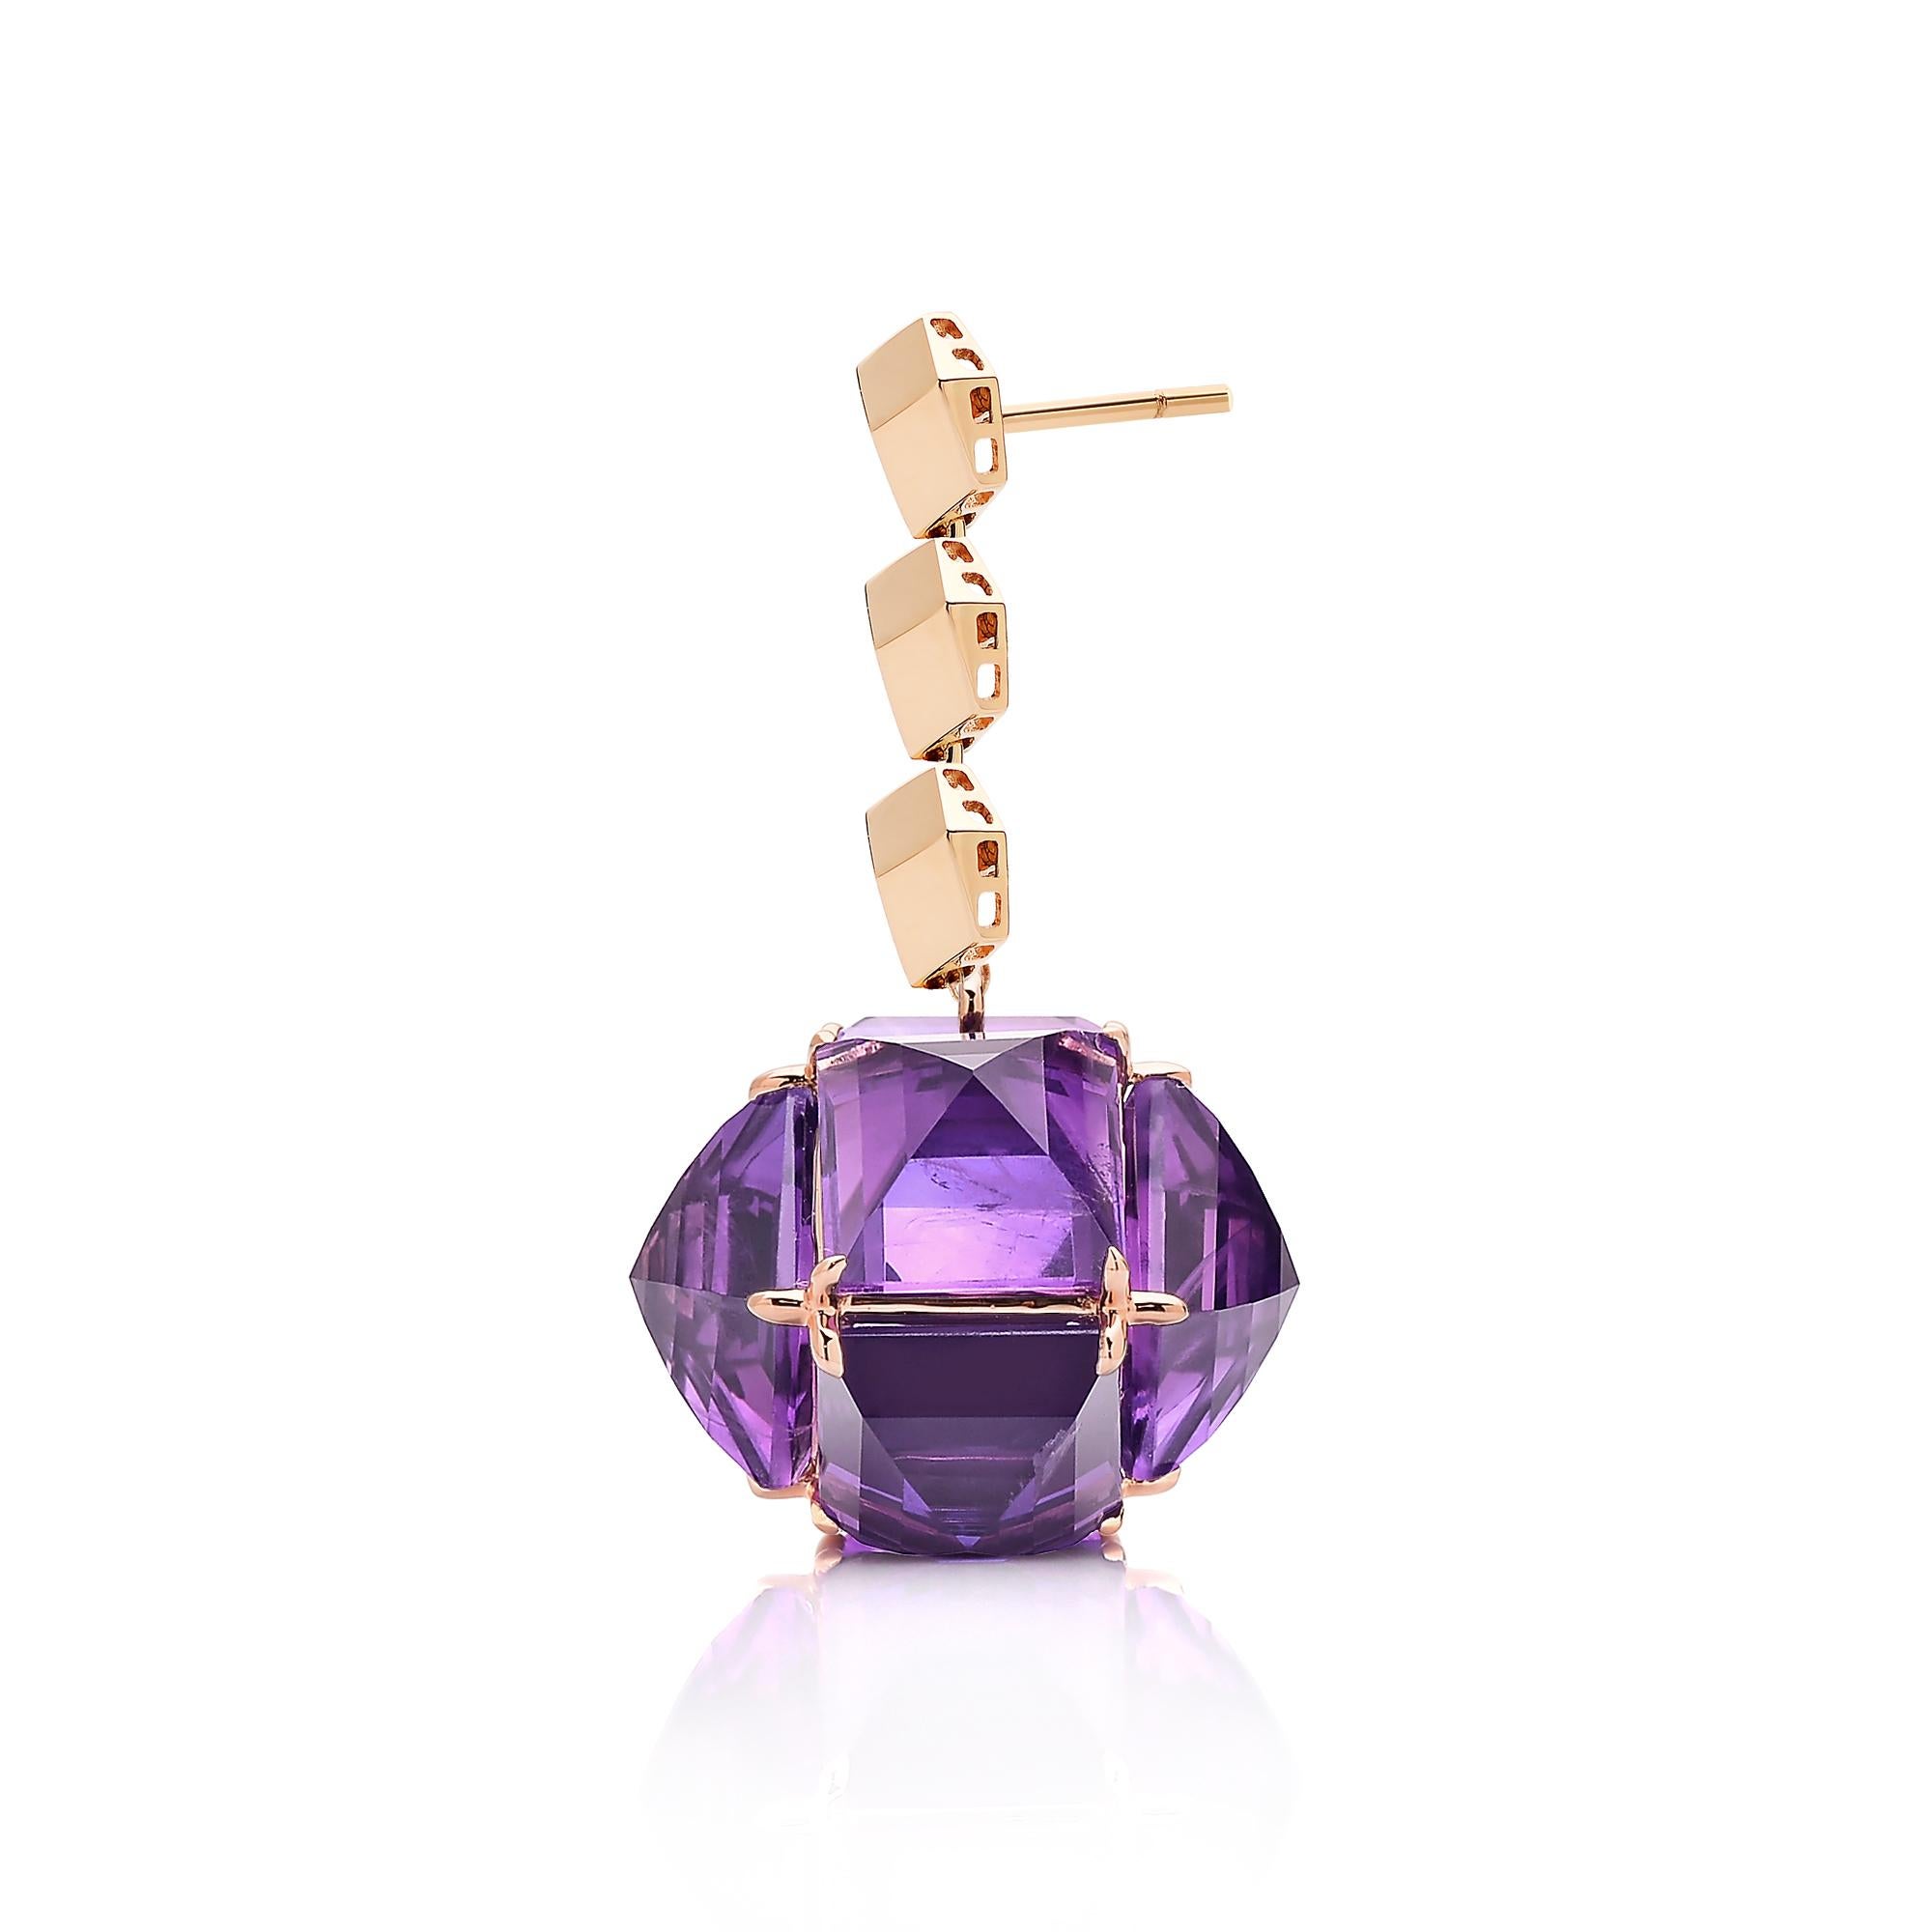 High polish 18kt rose gold Brillante® earrings paired with reverse set emerald-cut amethyst earring pendants from the Very PC® collection.

Staying true to Paolo Costagli’s appreciation for modern and clean geometries, the Very PC® collection